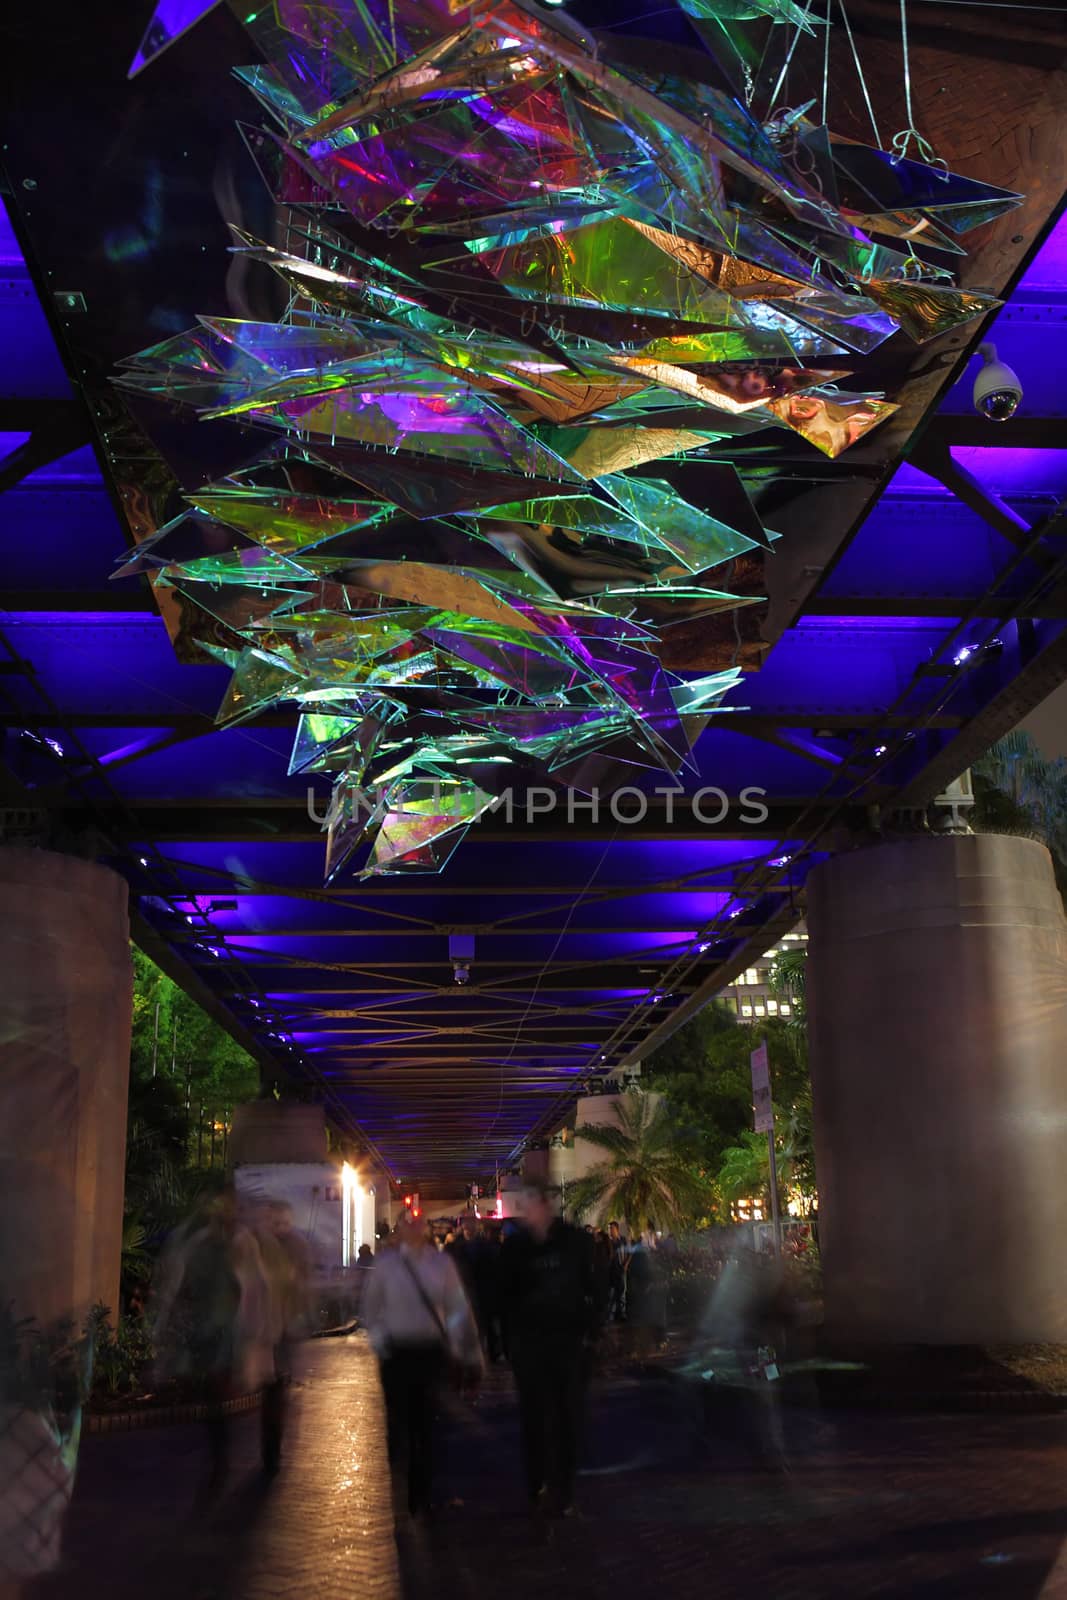 Made You Look Kaleidoscope at Vivid Sydney Festival  by lovleah